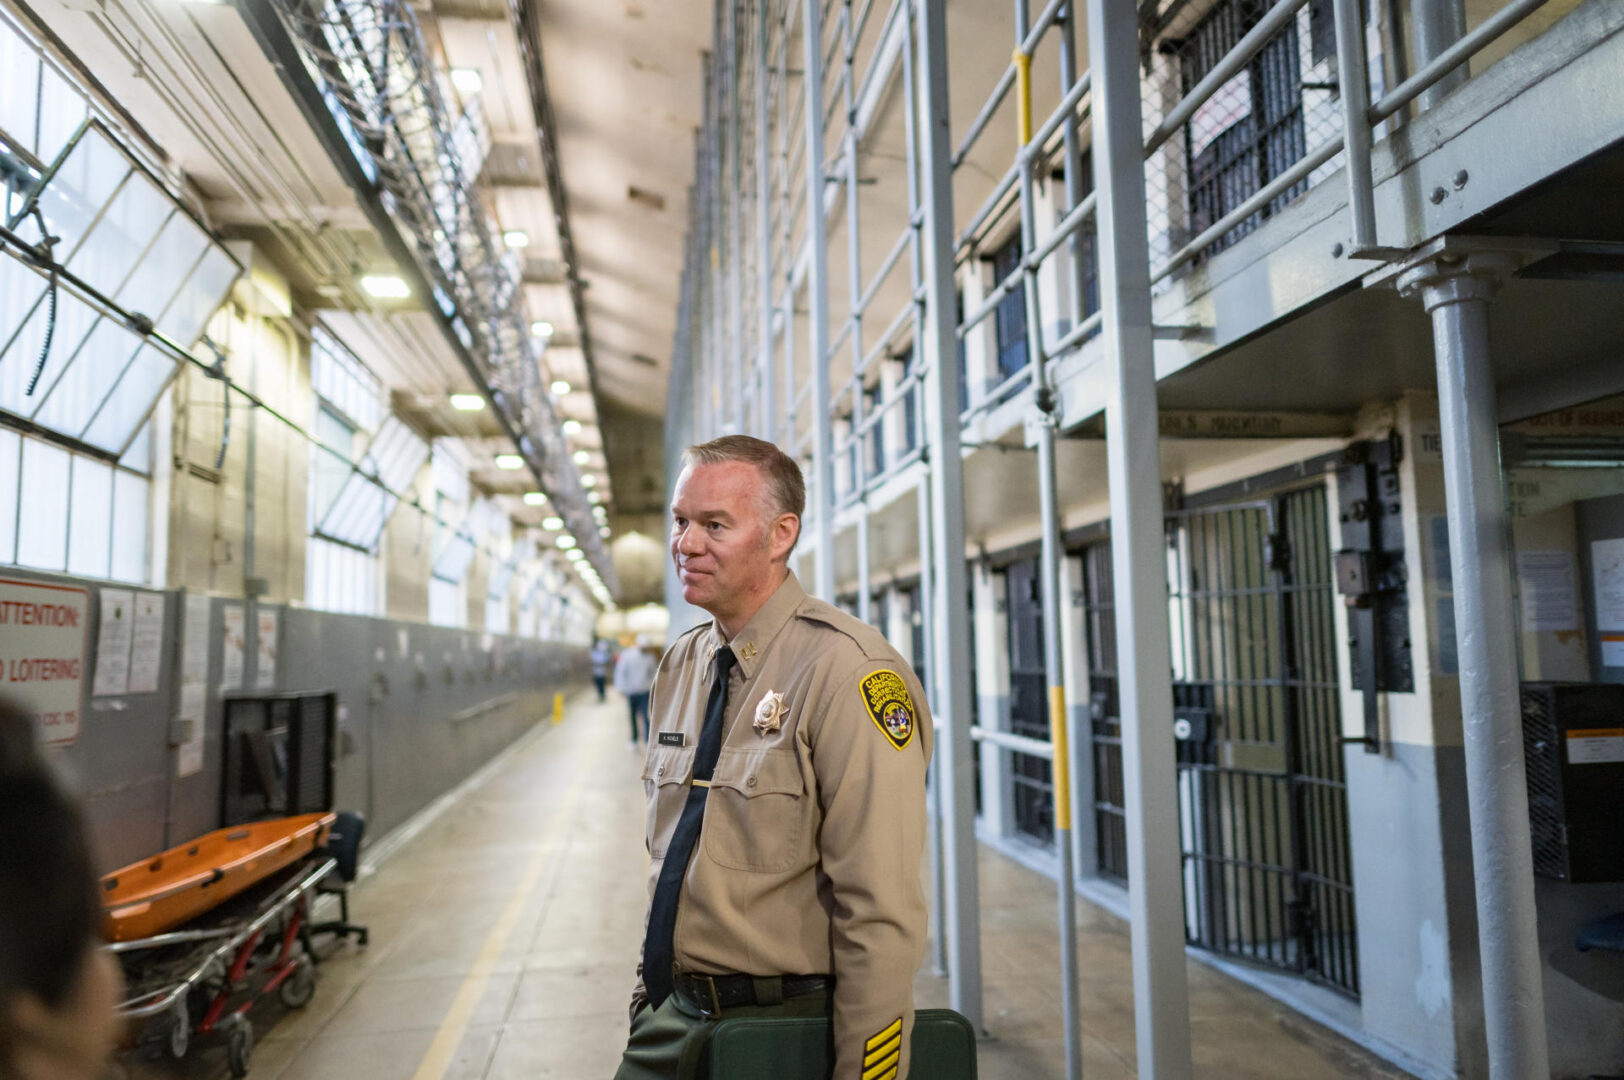 Capt. Keith Michels stands in a hallway of one of the housing units at Folsom State Prison. Prison cells can be seen in the background. 